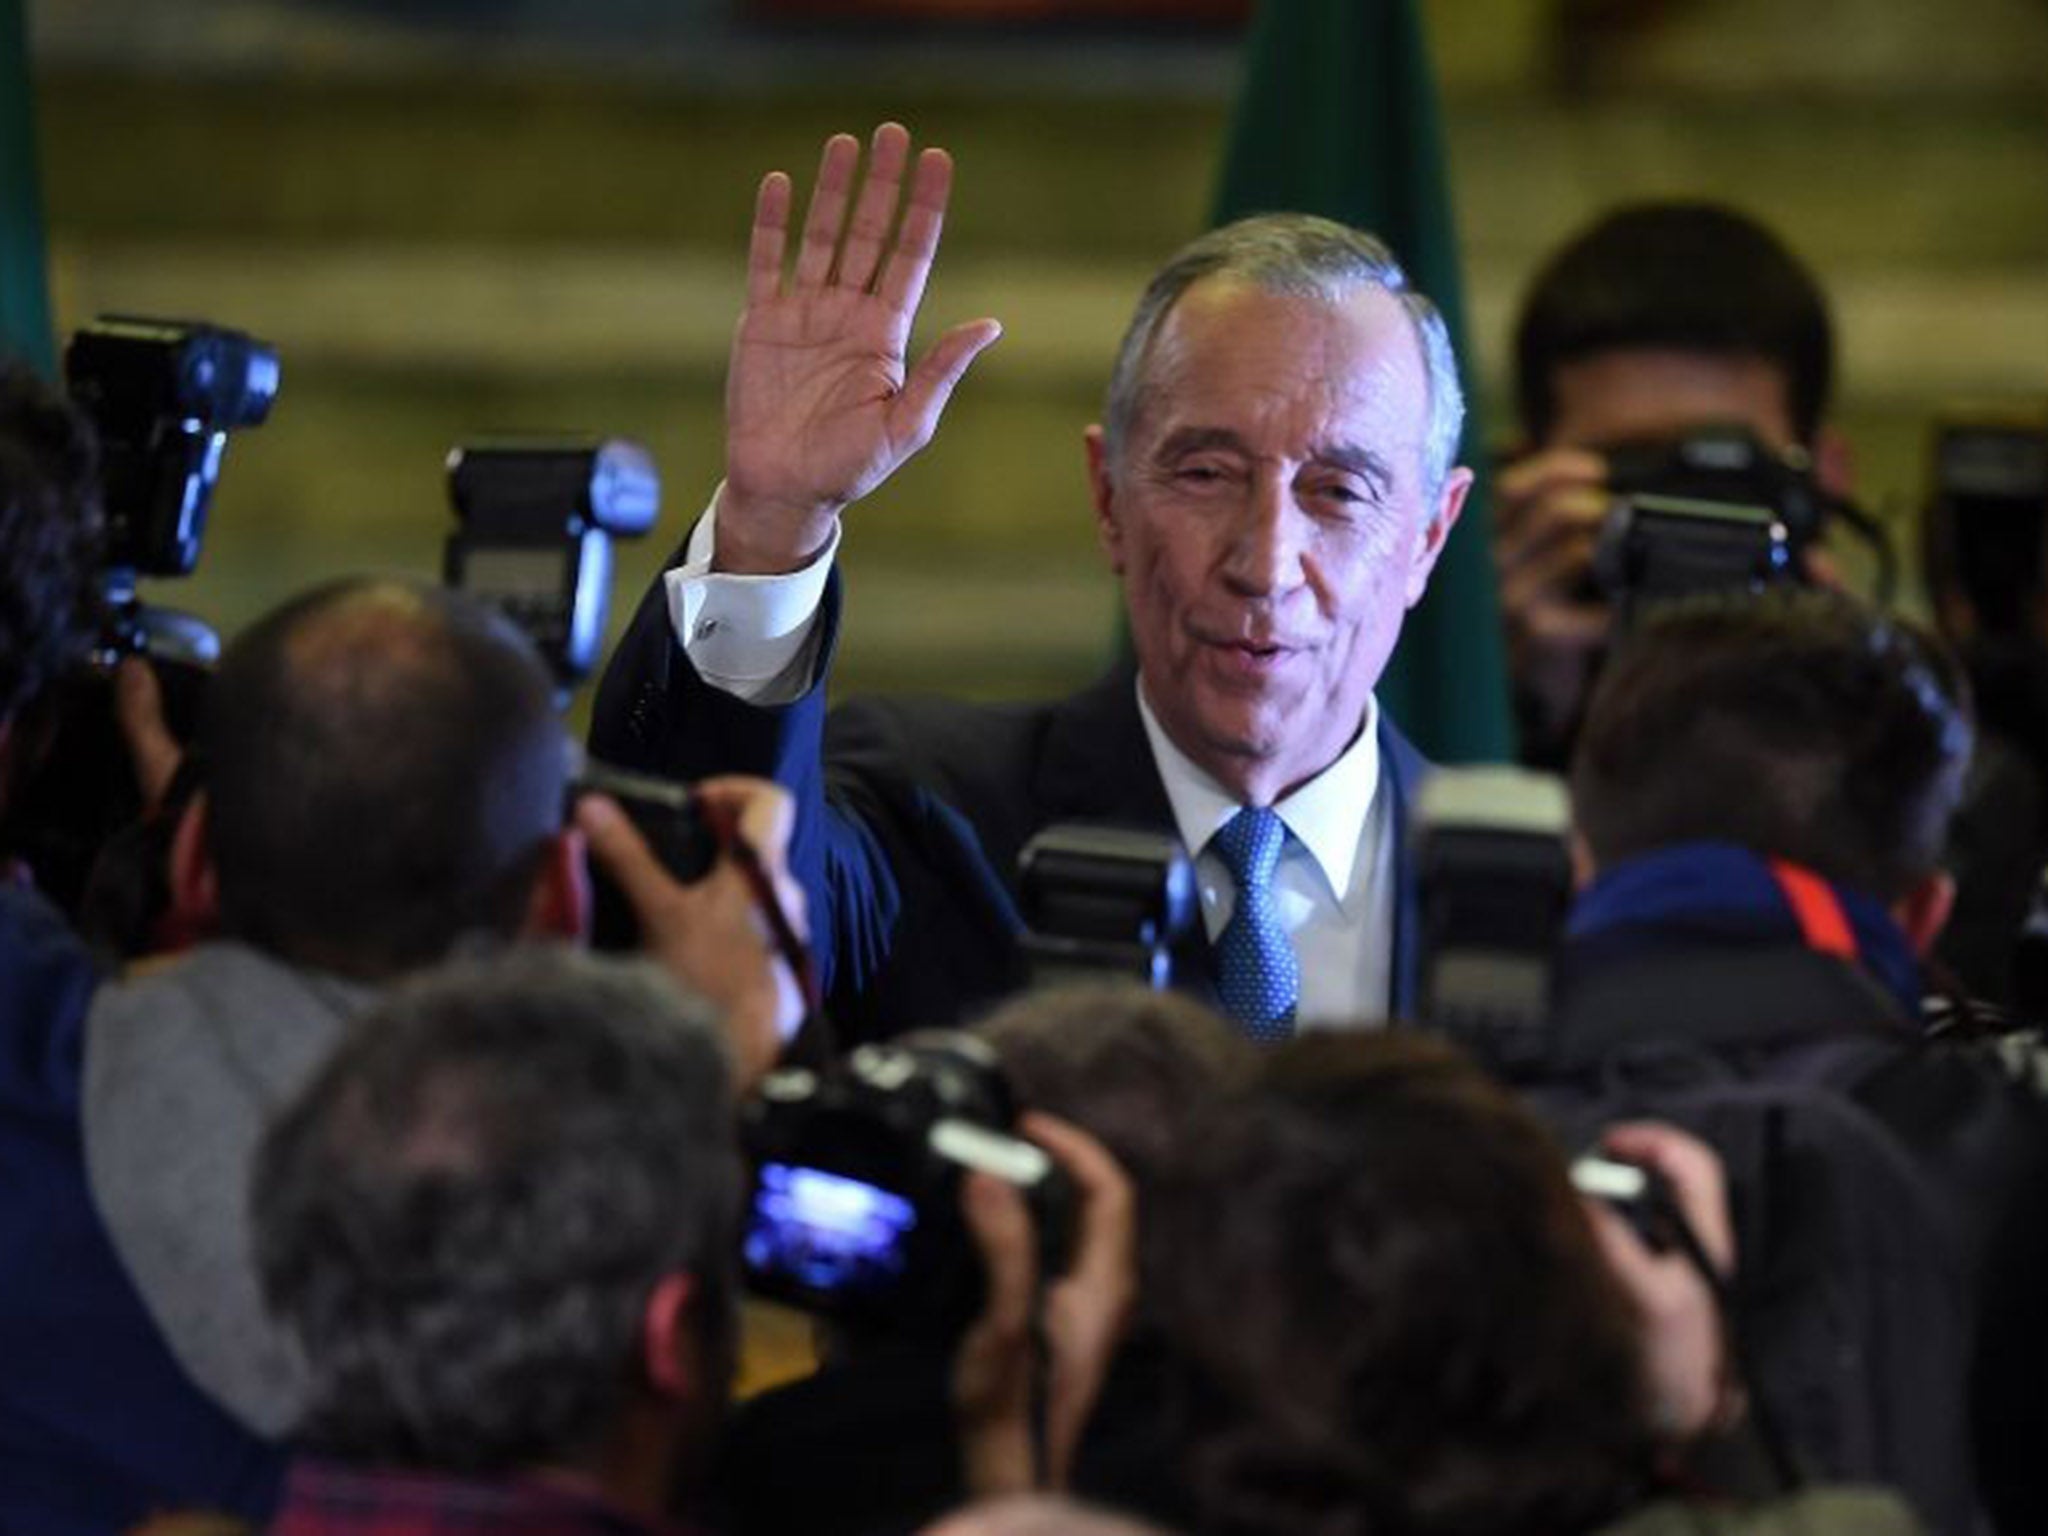 Marcelo Rebelo de Sousa greets photographers after winning the Portuguese presidential election